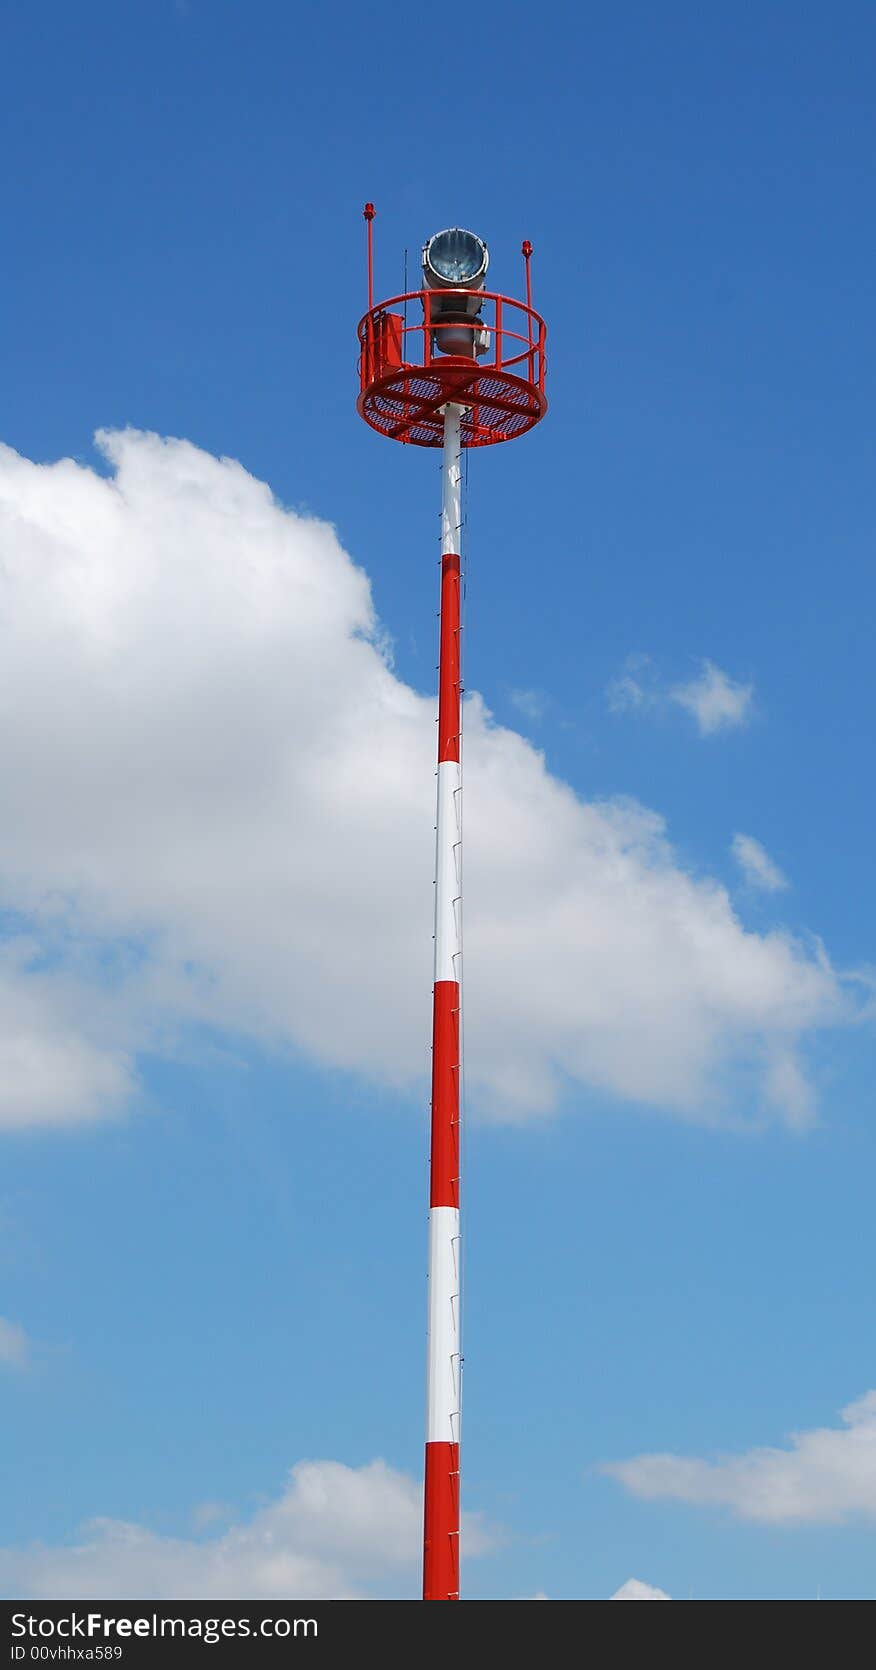 An airport beacon used as a visual aid for pilots